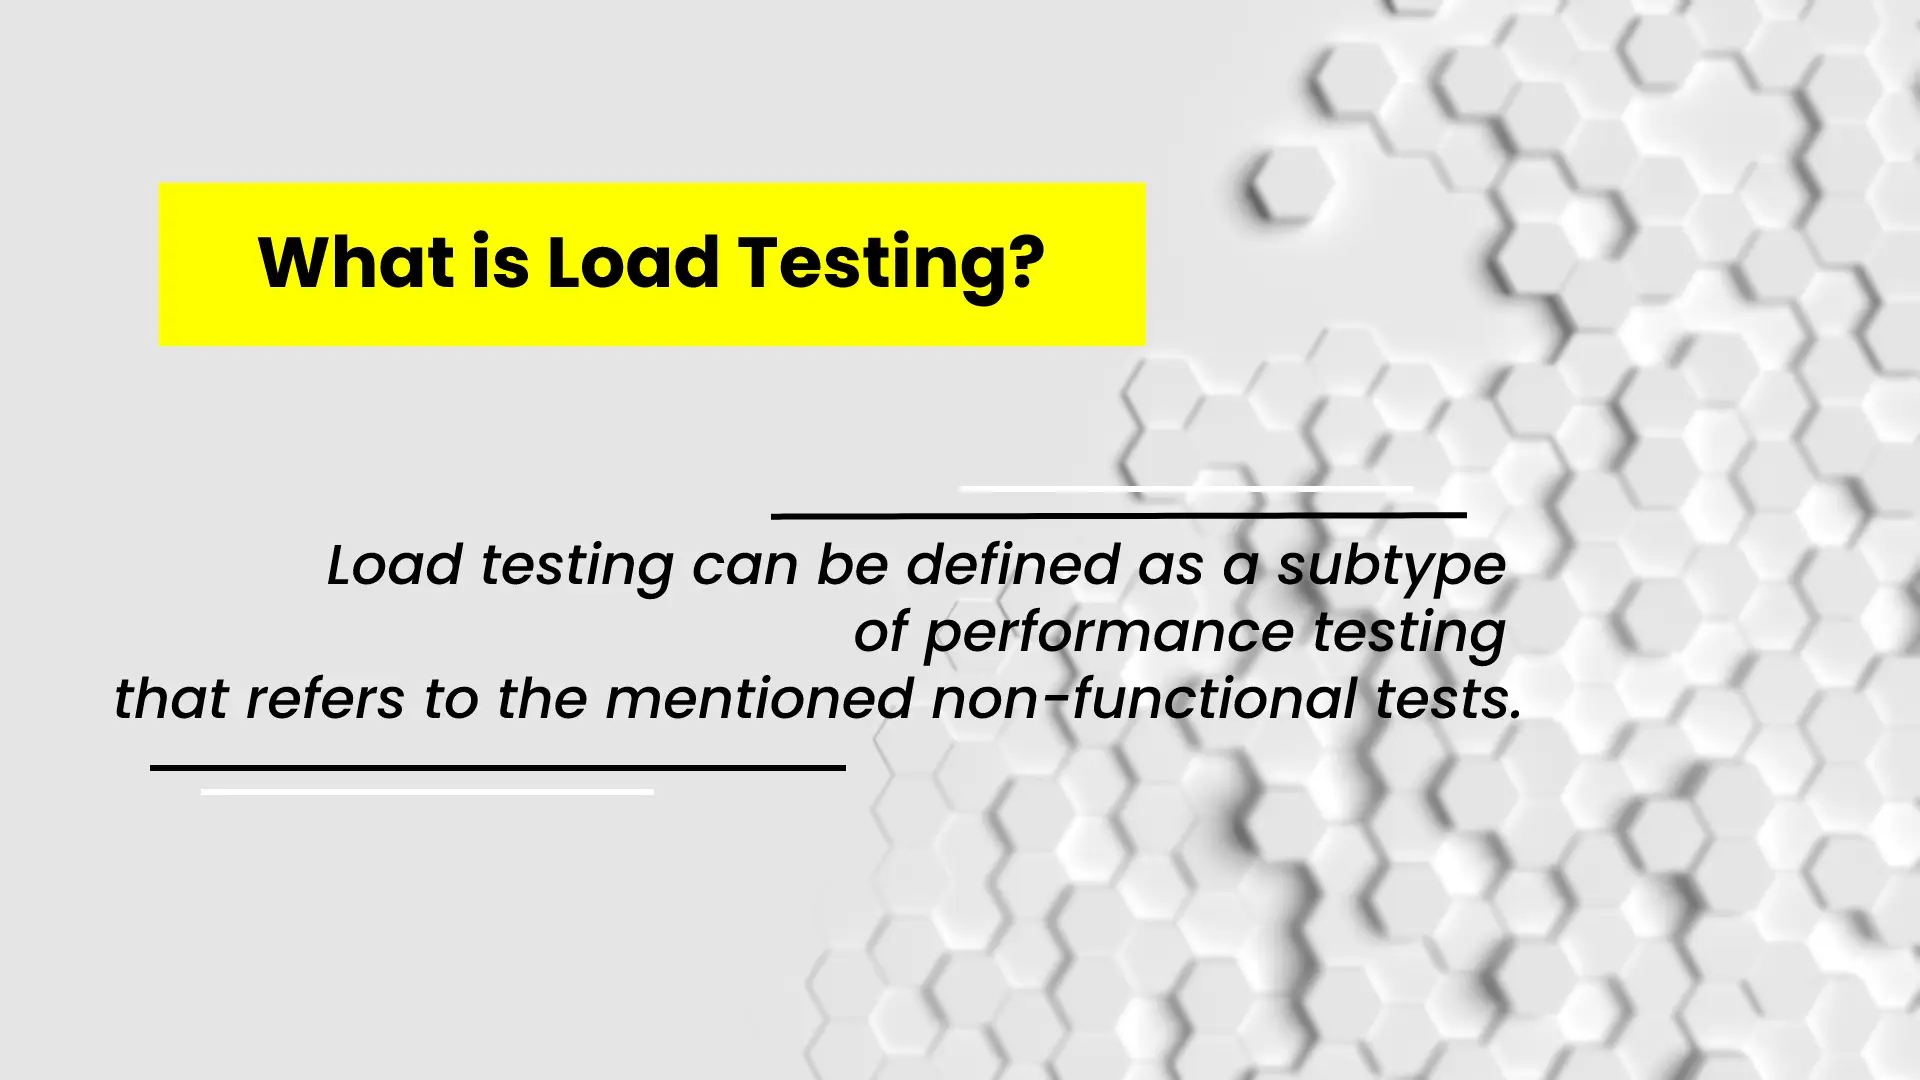 What is load testing